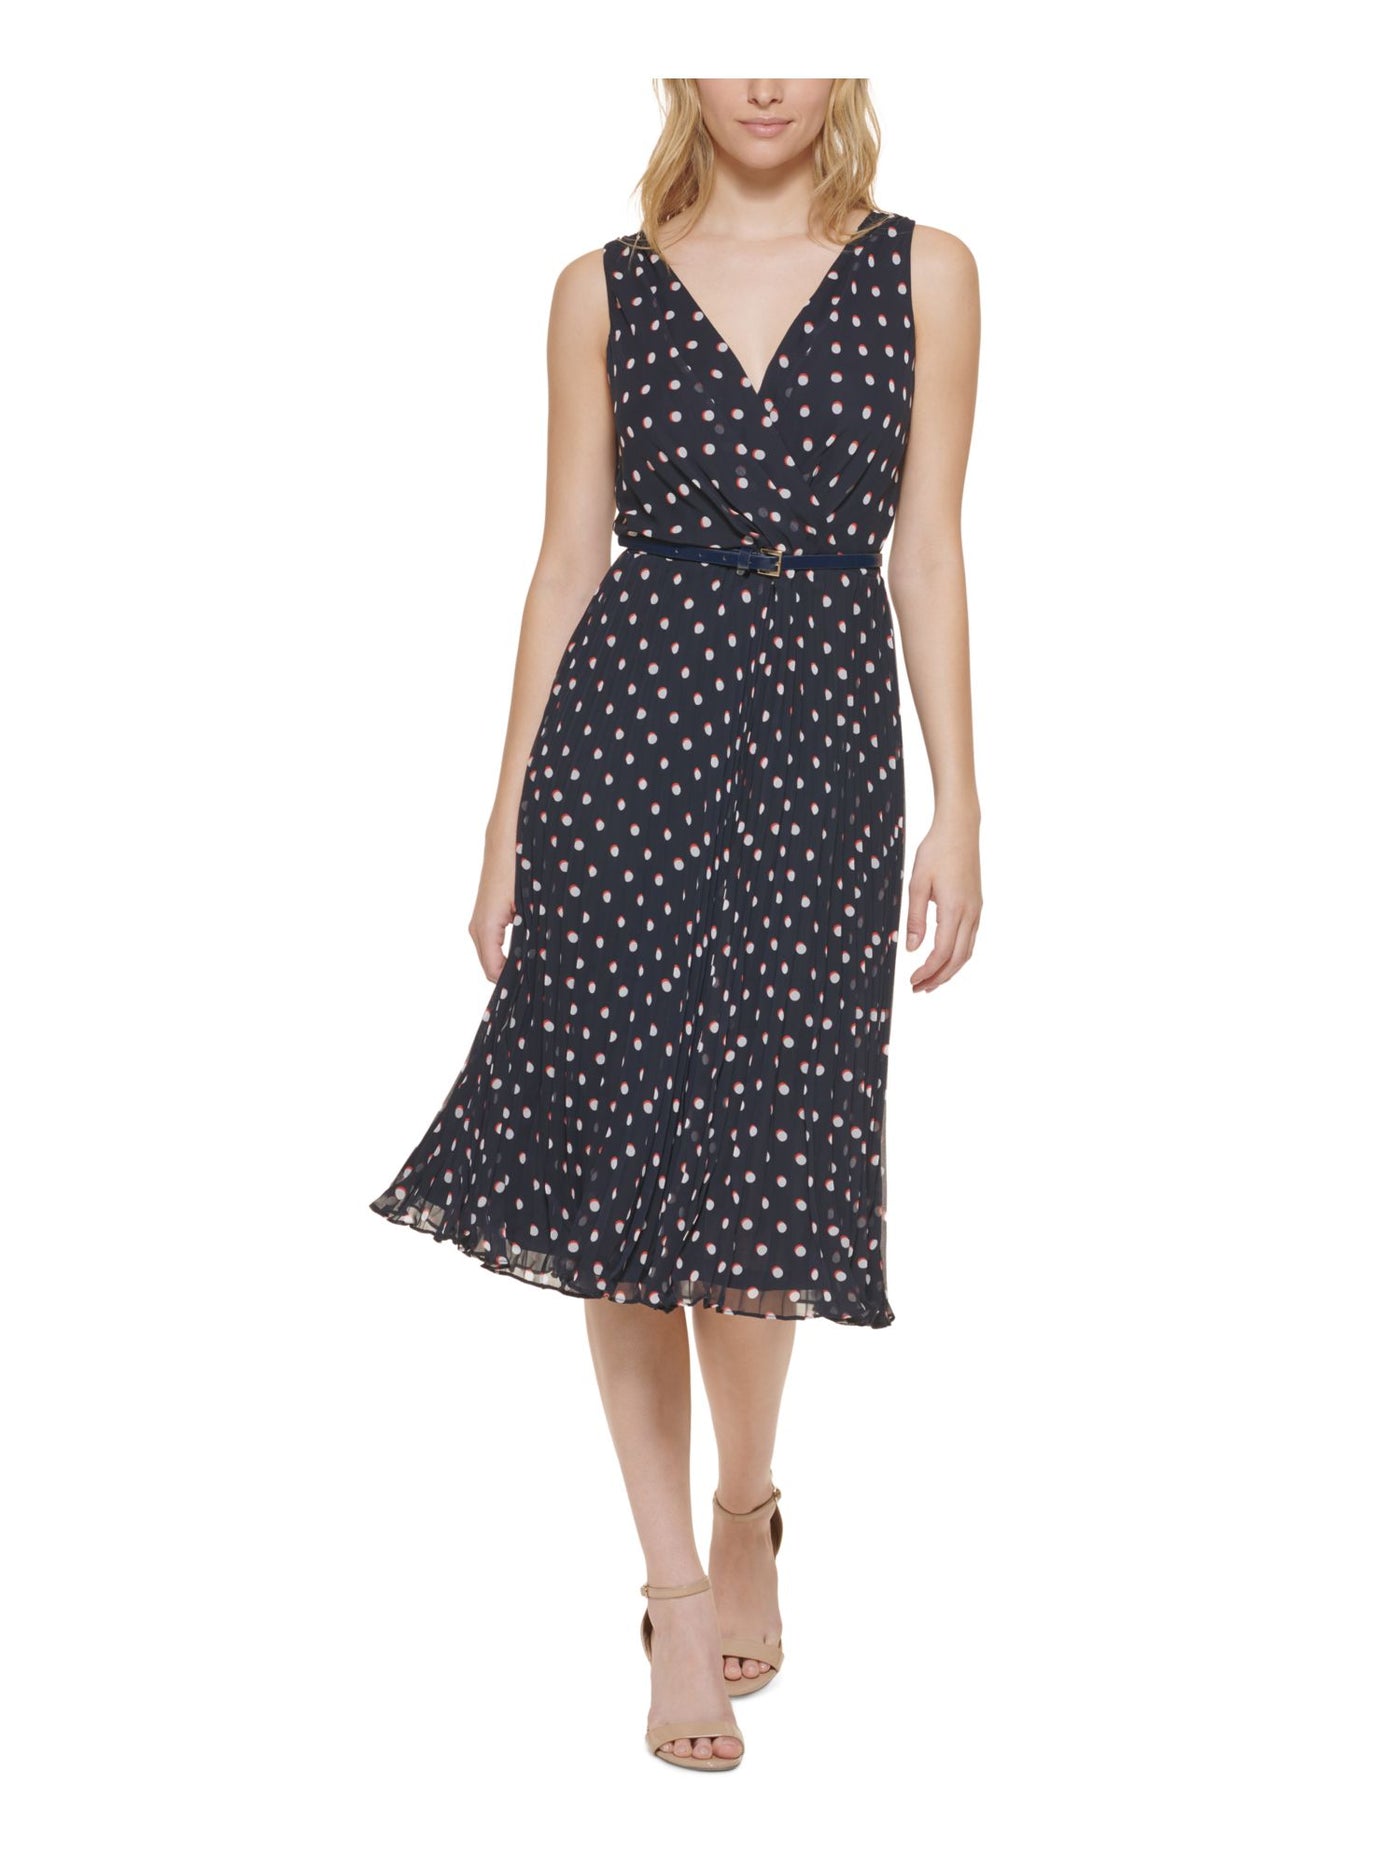 TOMMY HILFIGER Womens Navy Belted Zippered Sheer Lined Pleated Polka Dot Sleeveless Surplice Neckline Below The Knee Fit + Flare Dress Petites 12P